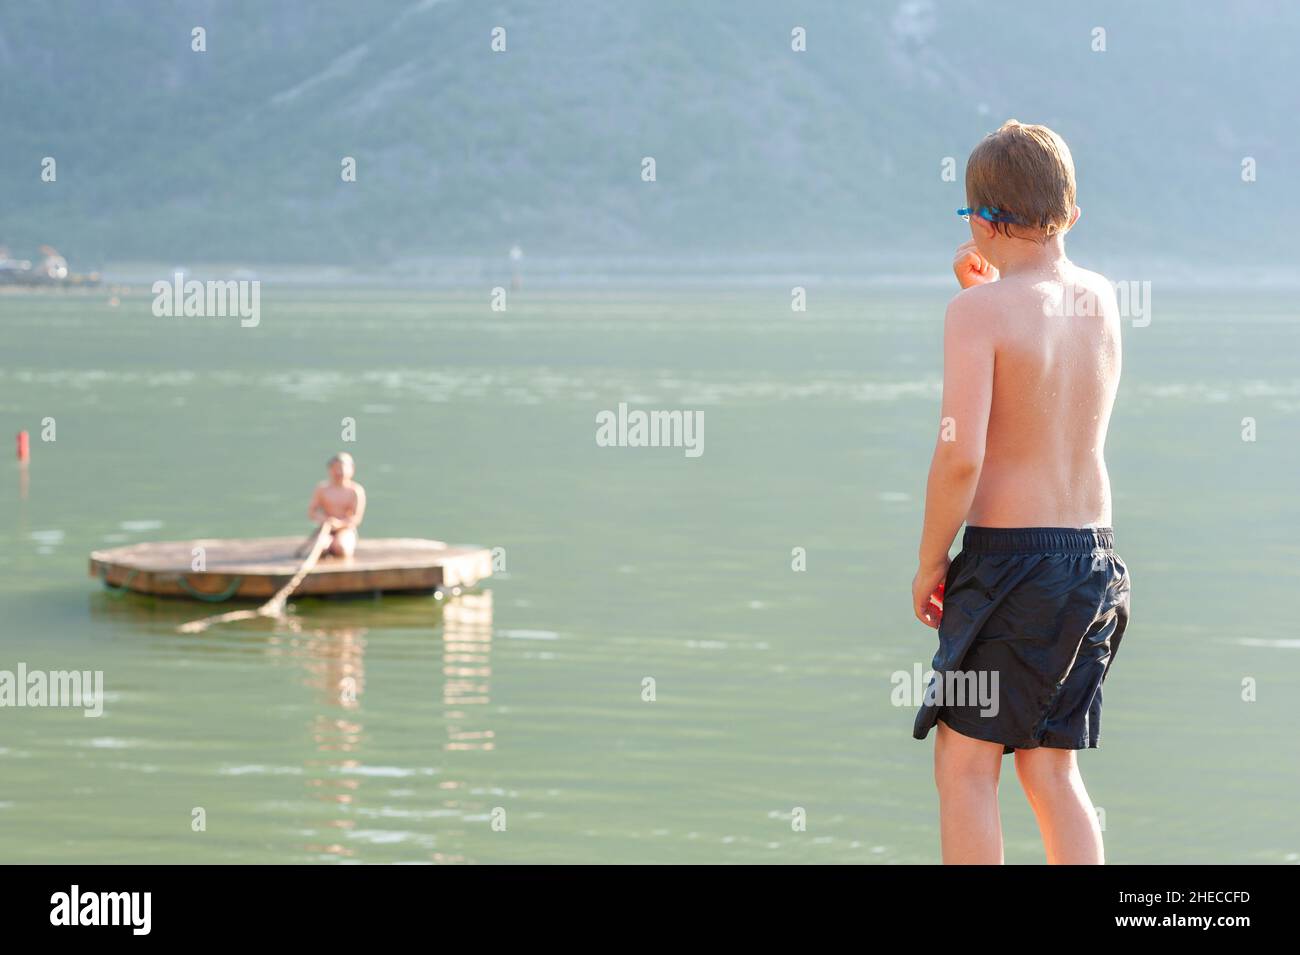 Kids having fun, jumping into cold fjord water, Eidfjord, Norway Stock Photo